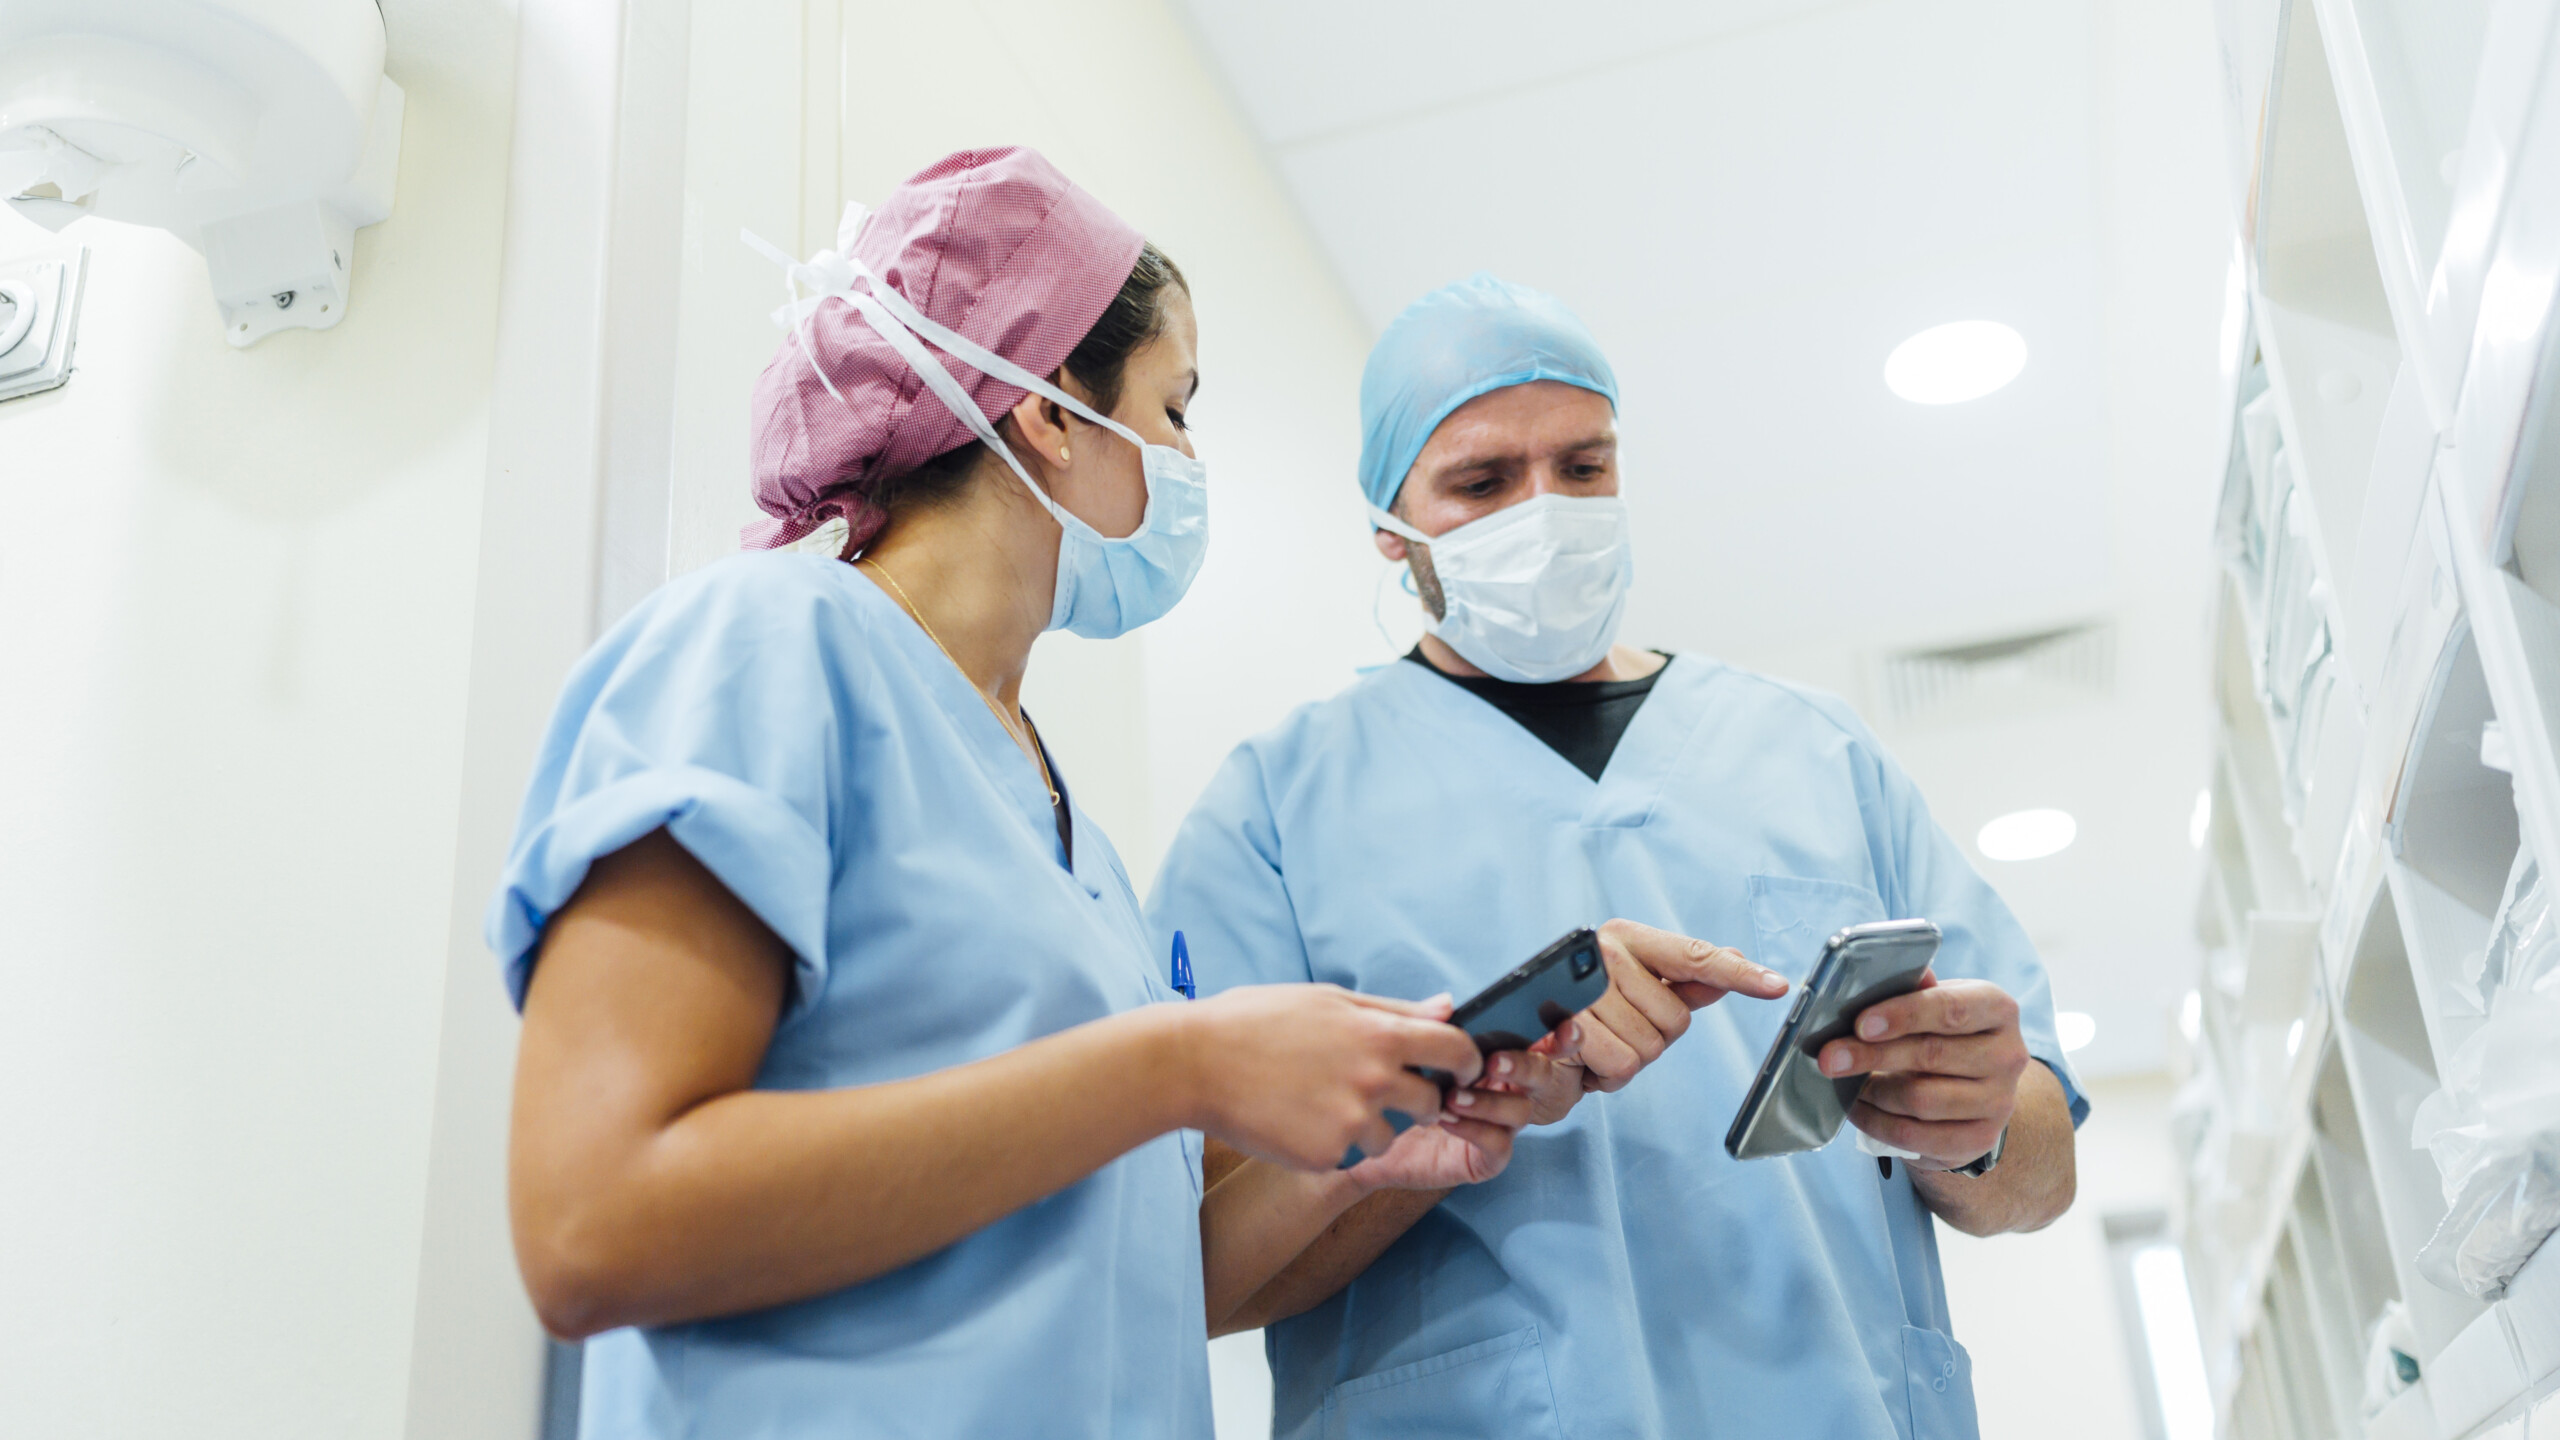 Doctors using cell phones in the hospital corridor. Medical concept